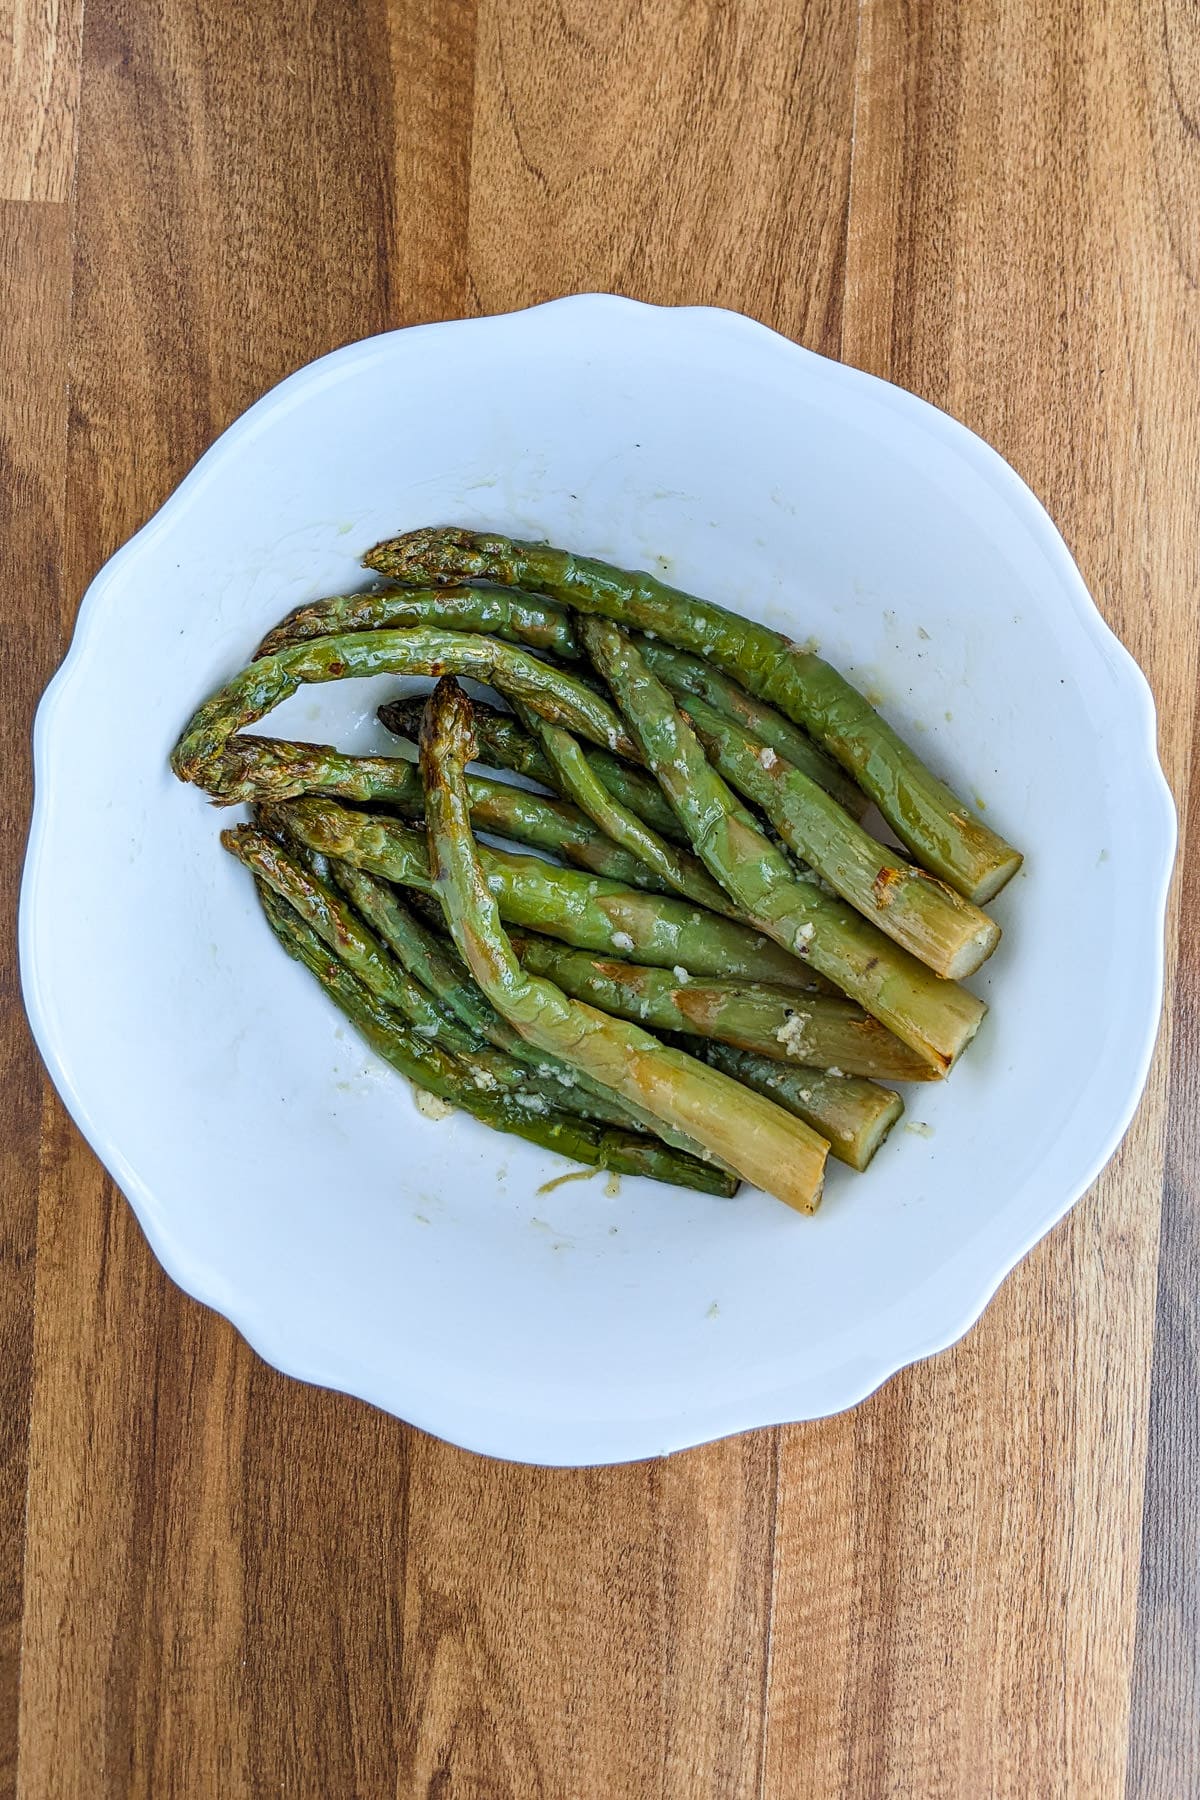 Frozen asparagus seasoned in a white plate.